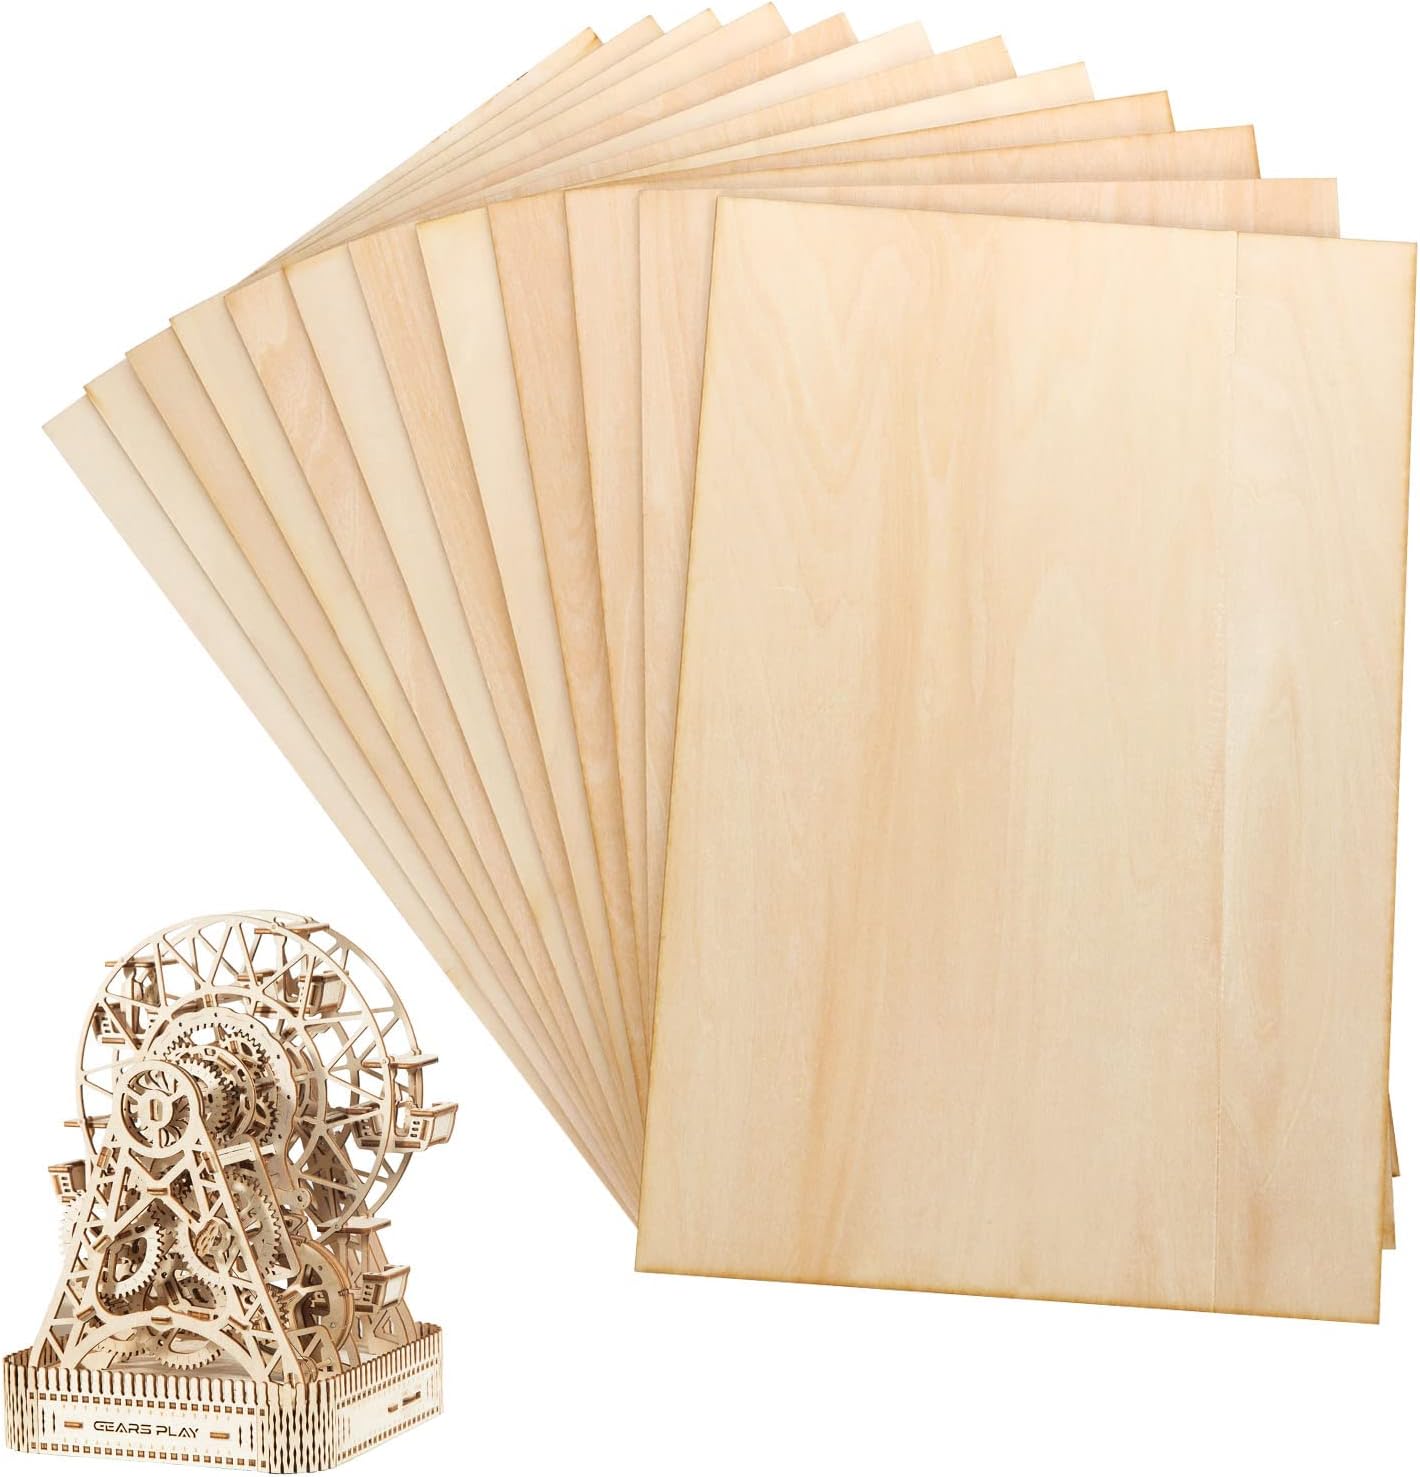 12 Pack 12 x 12 x 1/16 Inch-2 mm Thick Basswood Sheets for Crafts